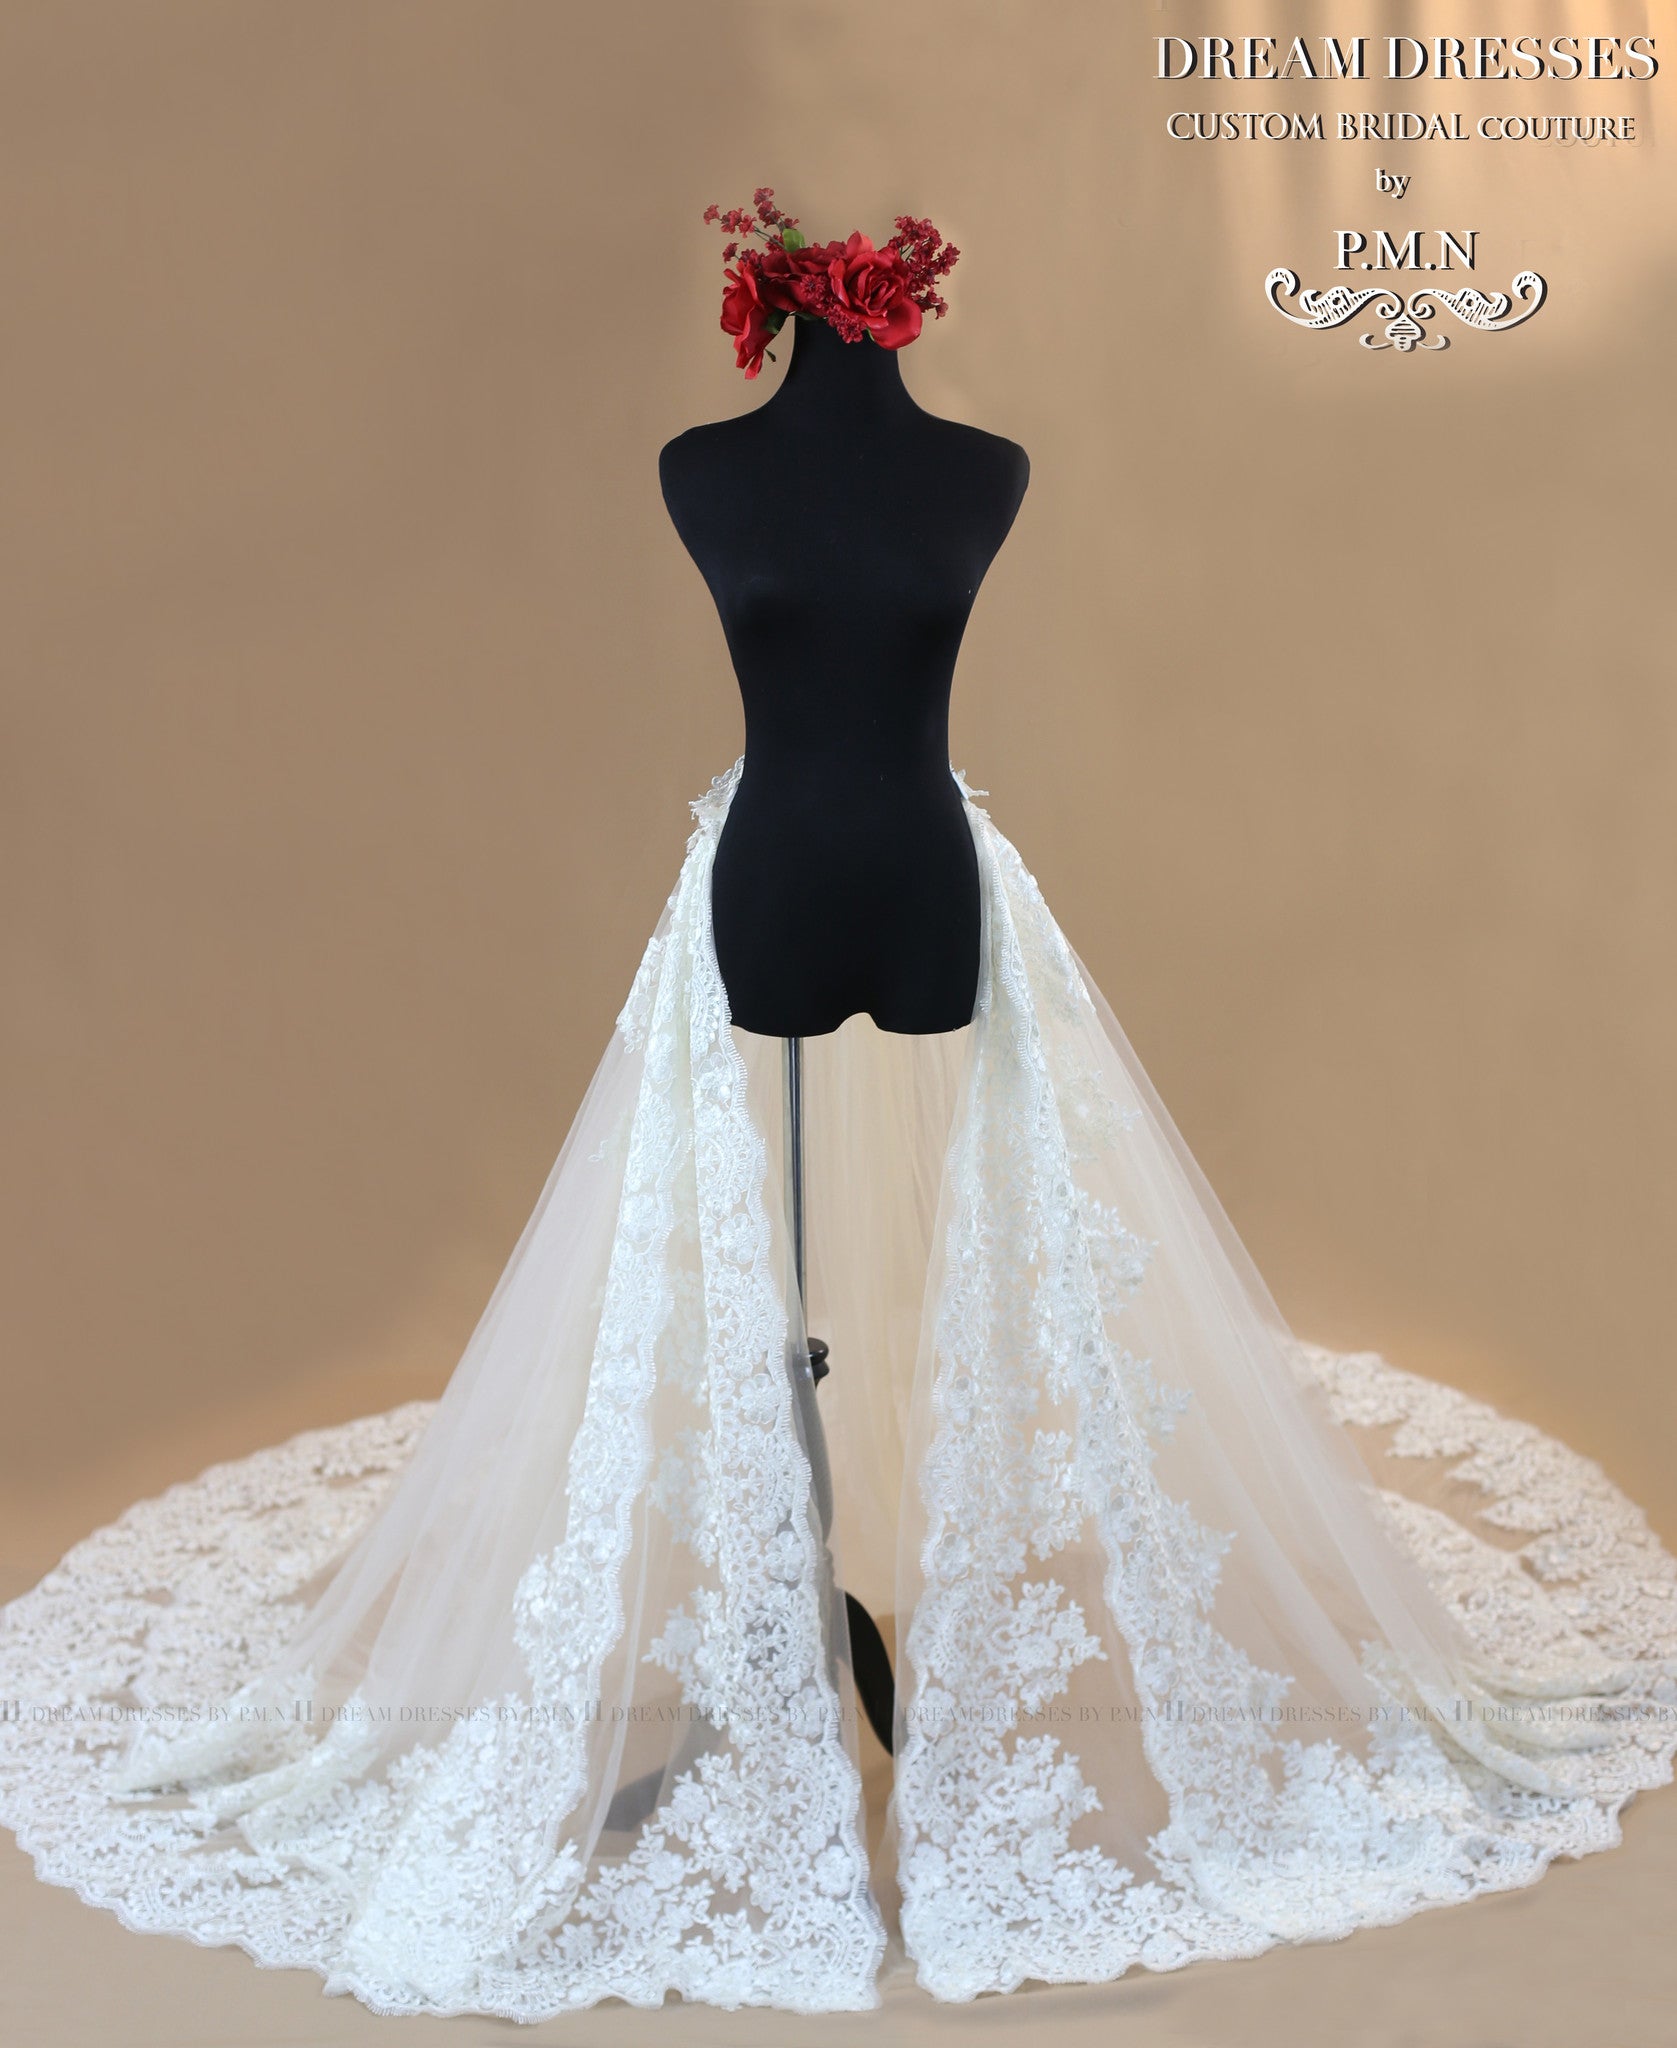 Bridal Detachable Cathedral Train With Two Layers of Lace Appliqué (Style #ANGIE PB153) - Dream Dresses by P.M.N
 - 2